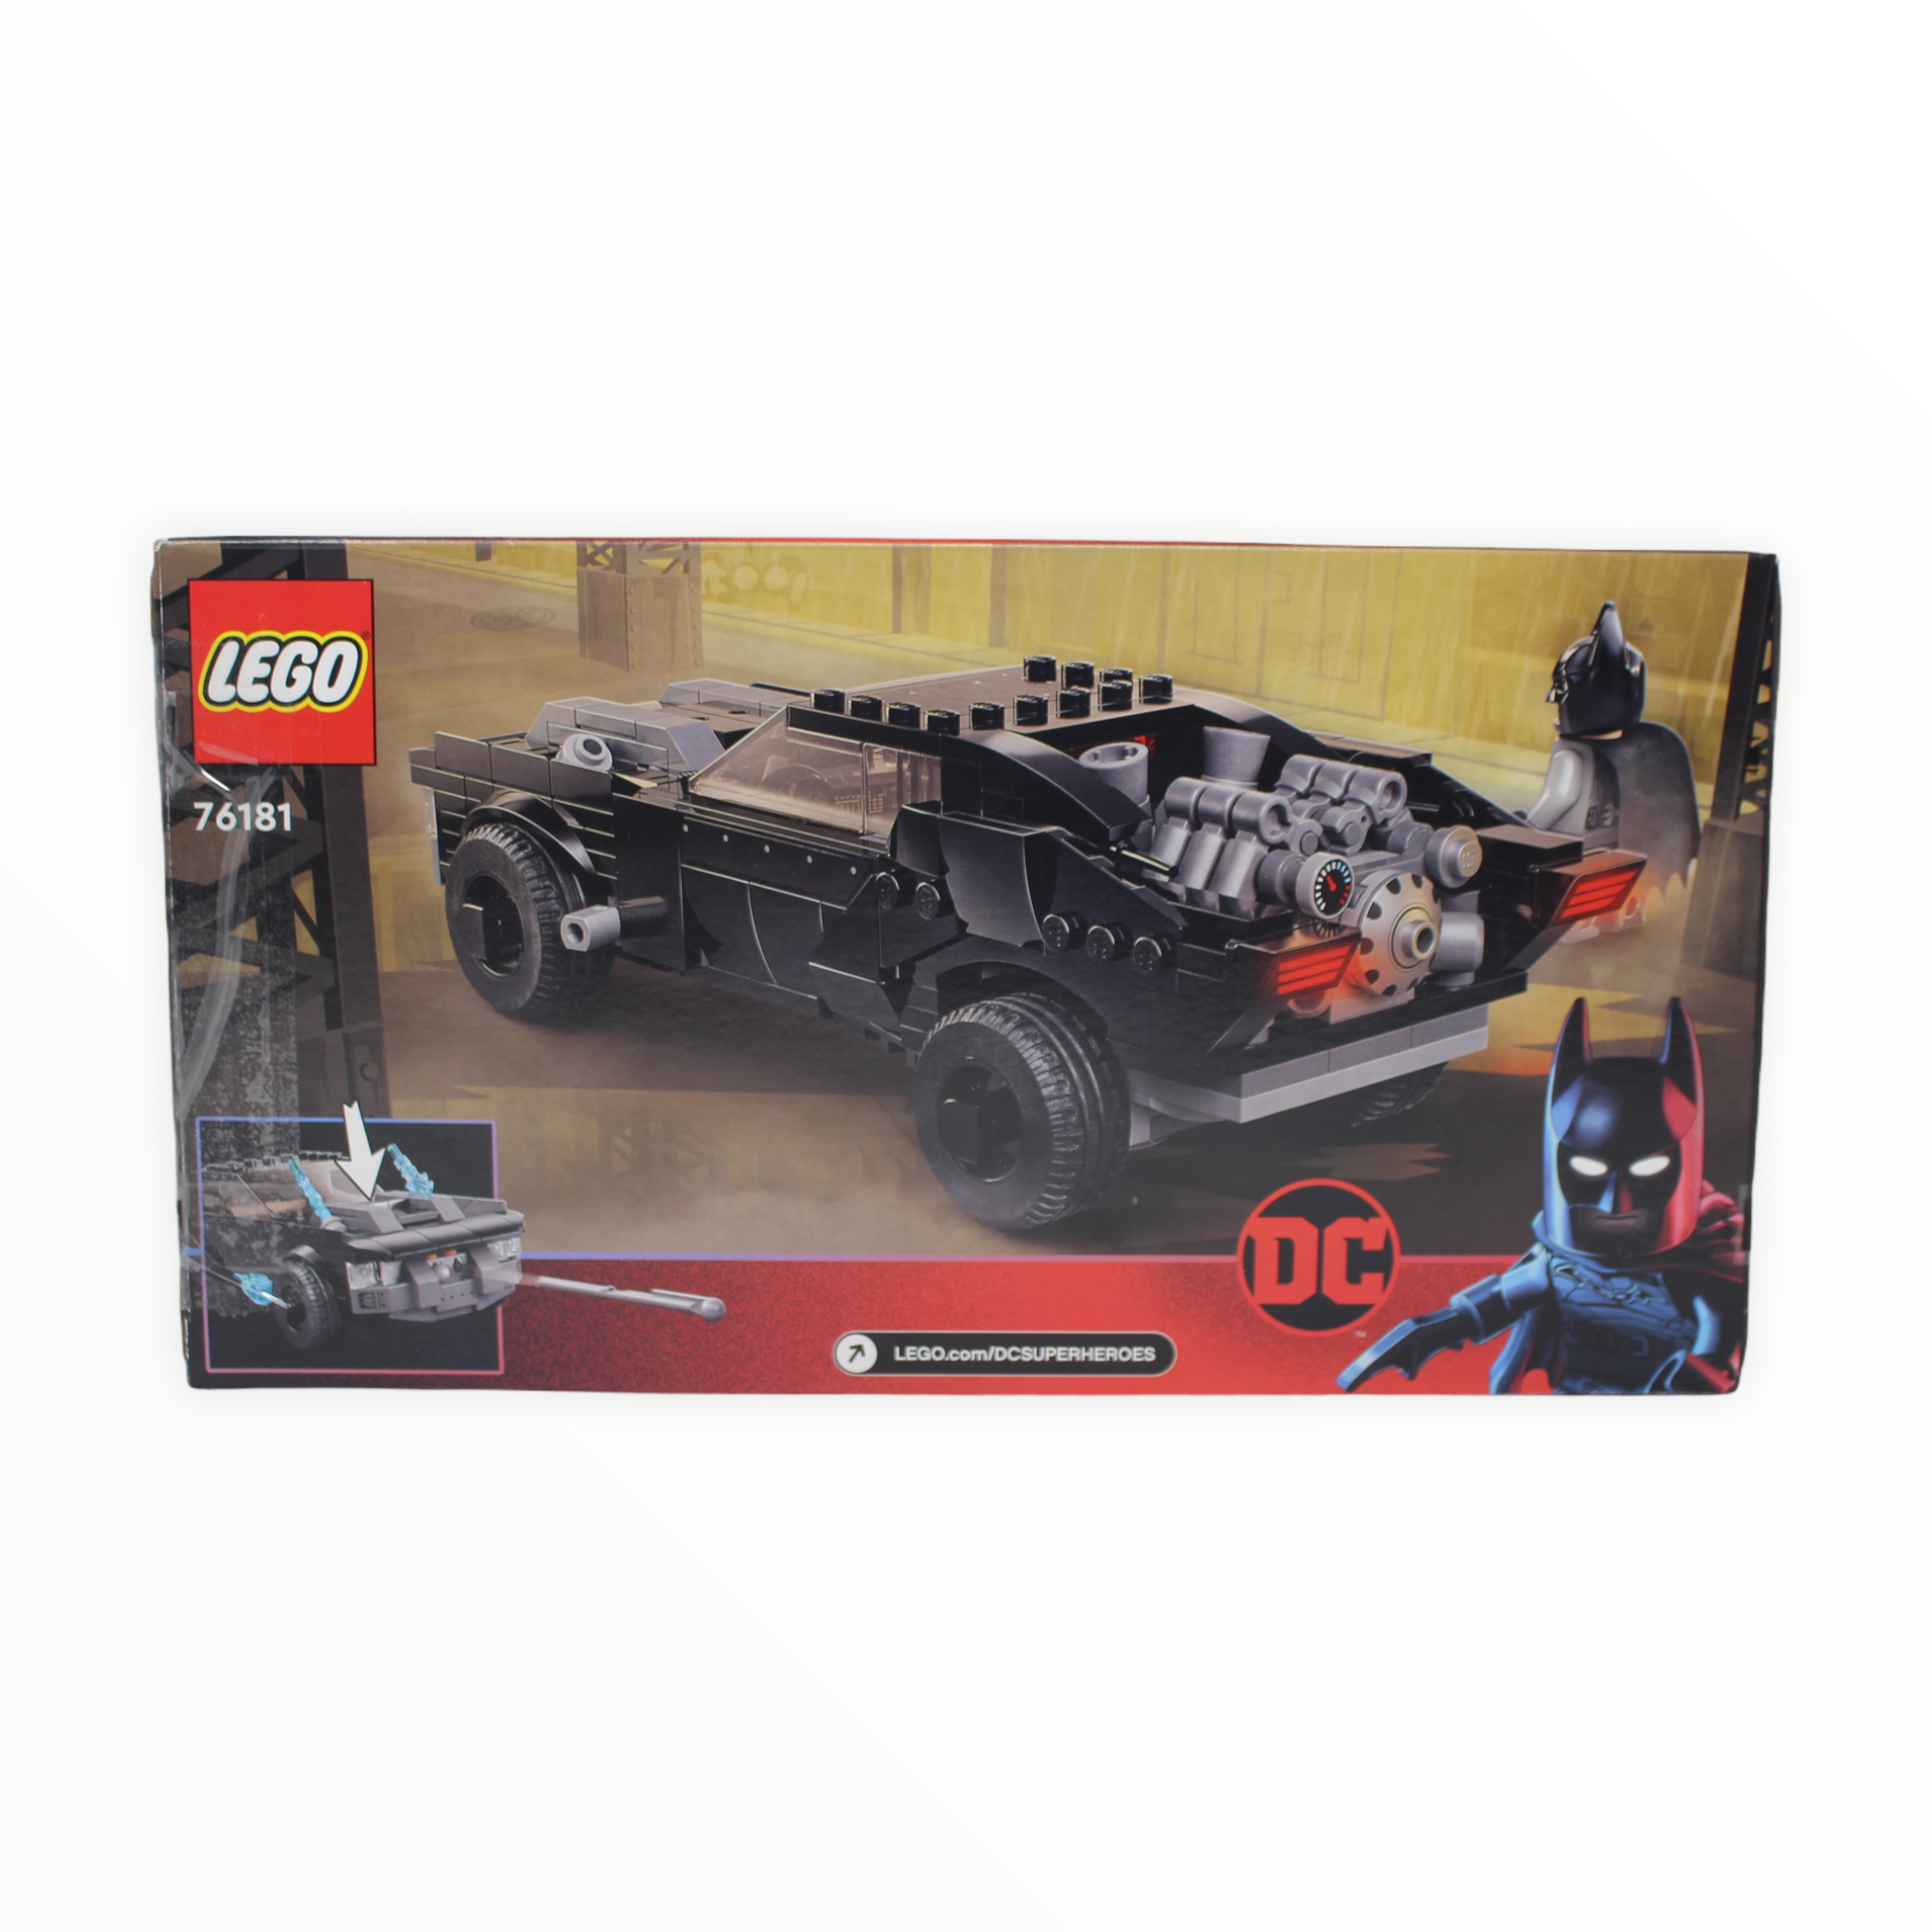 Certified Used Set 76181 The Batman Batmobile: The Penguin Chase